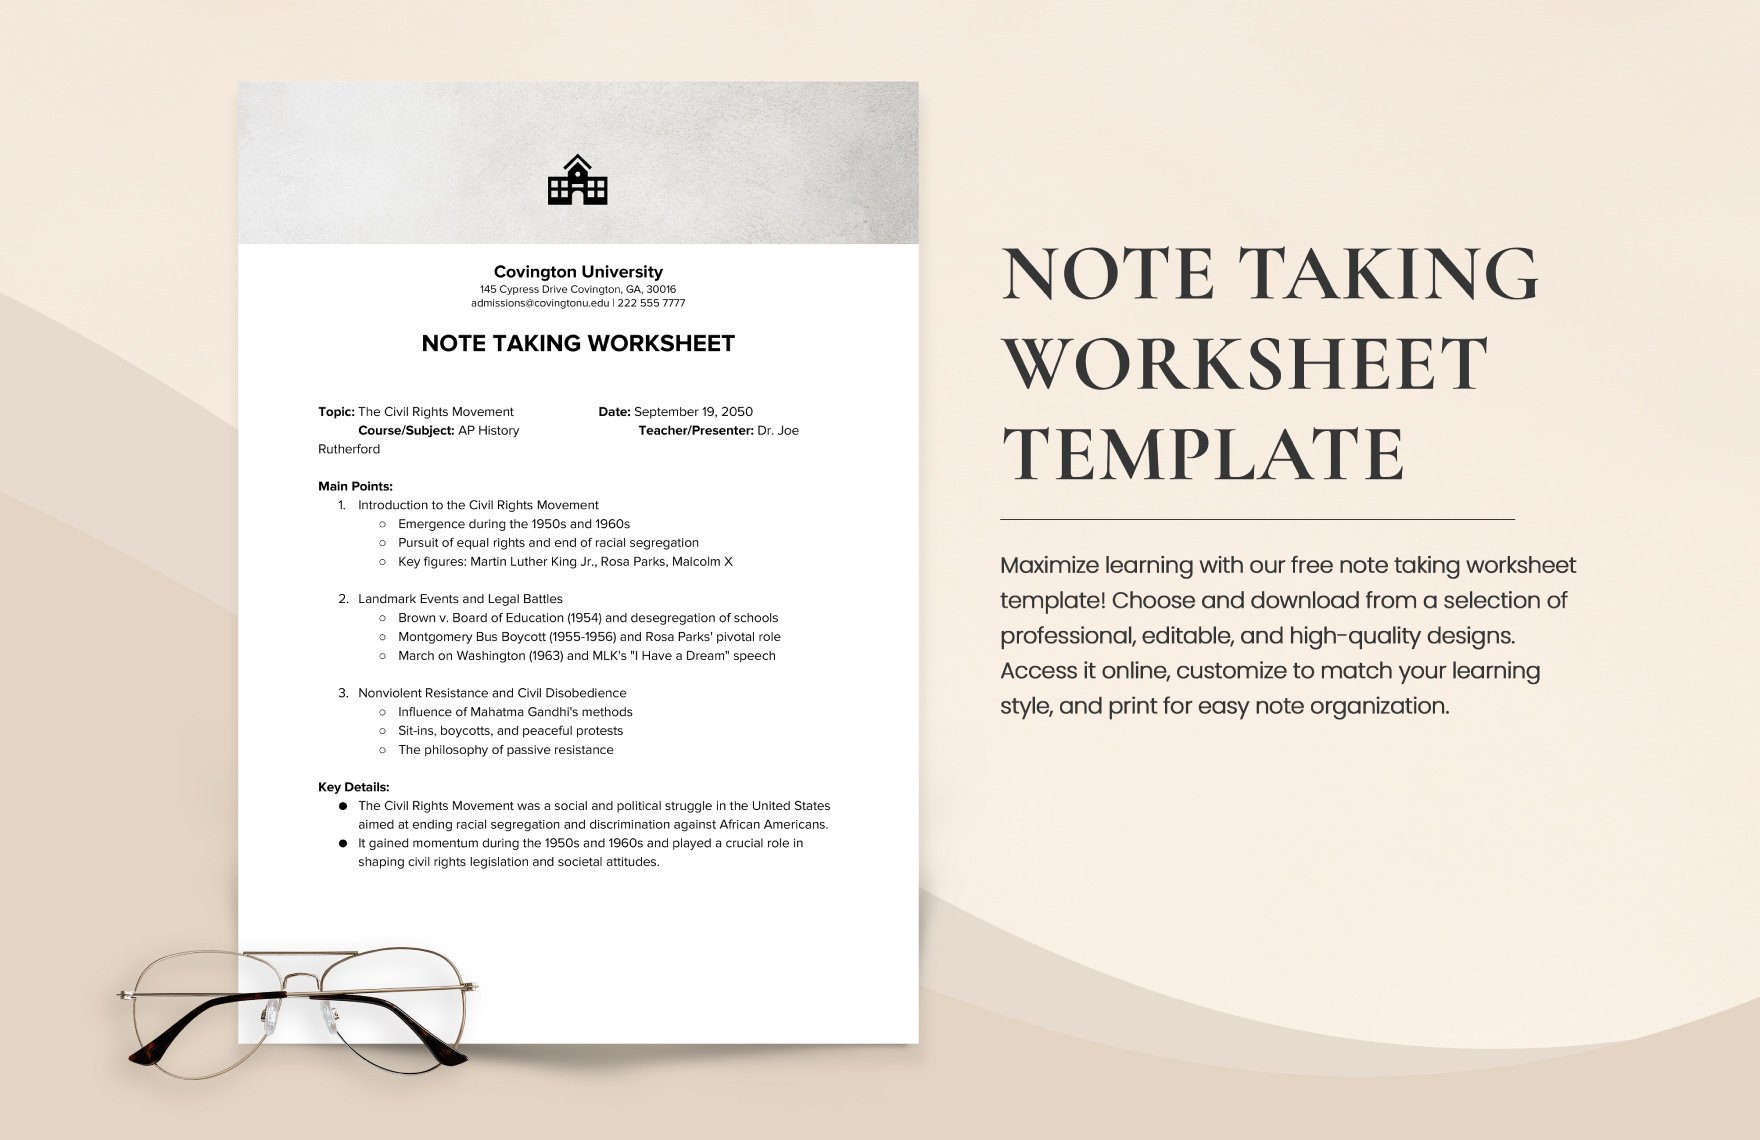 Free Note Taking Worksheet Template in Word, Google Docs, PDF, Apple Pages